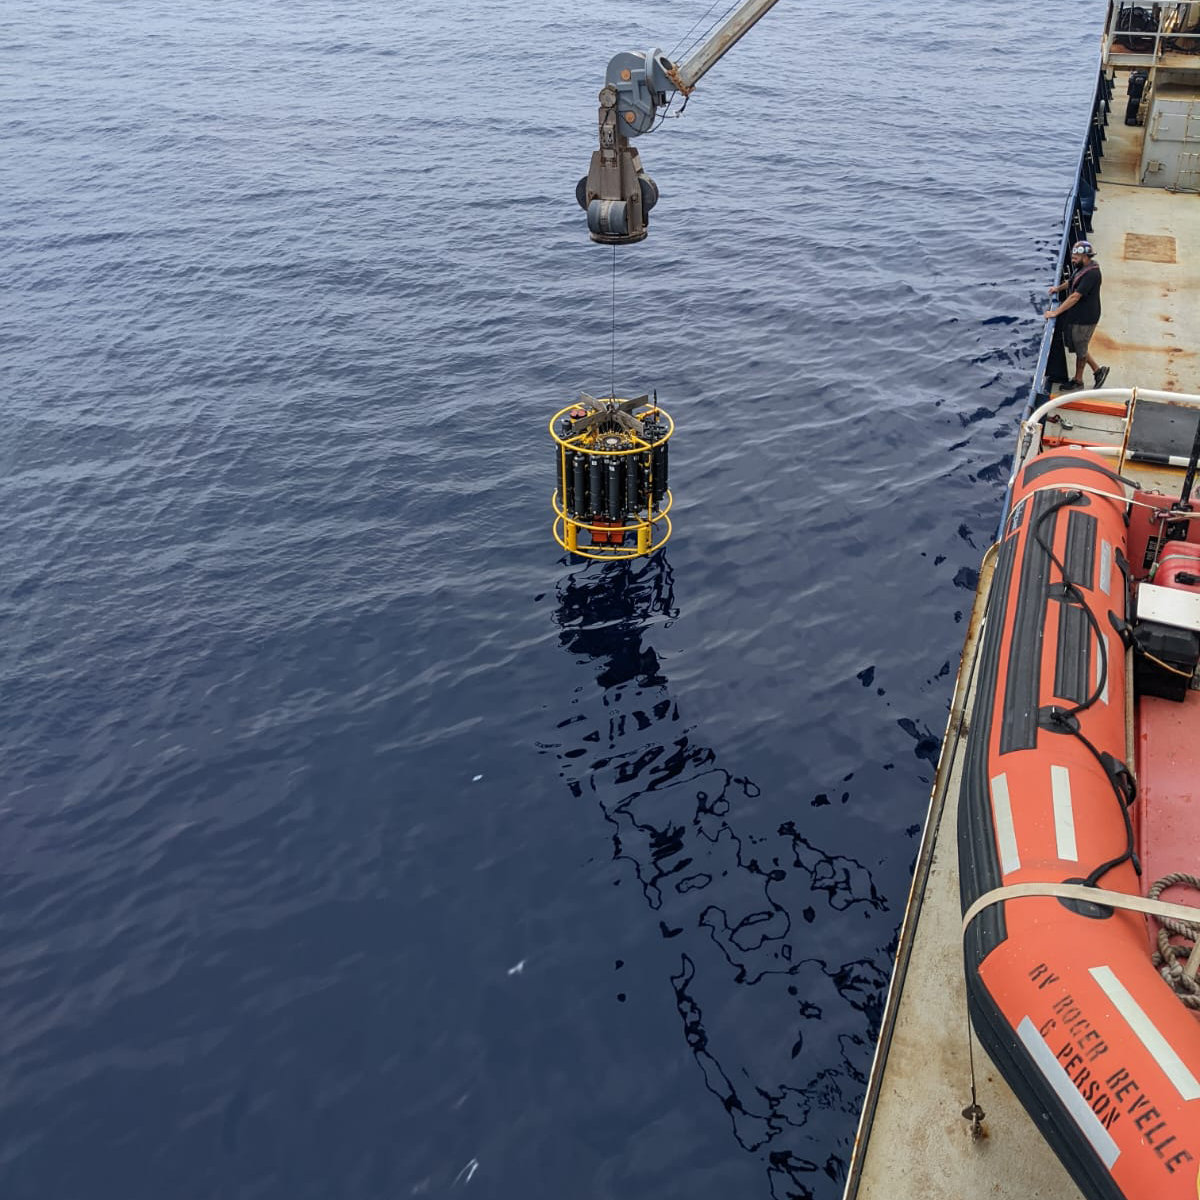 Rosette being deployed into the ocean. Photo by Sophie Shapiro.